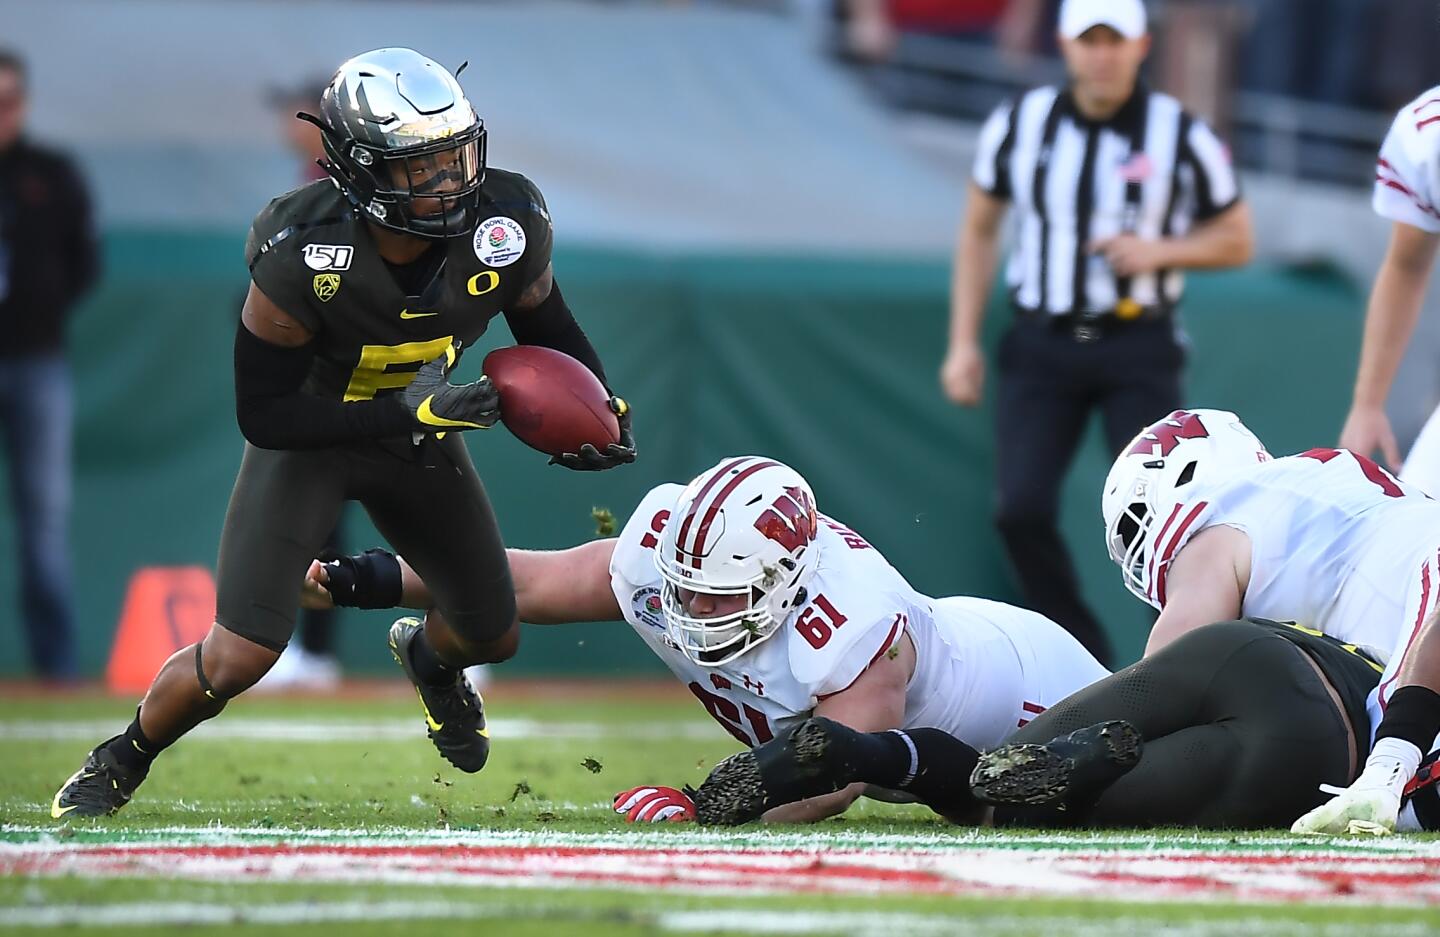 Oregon cornerback Deommodore Lenoir picks up a fumble against Wisconsin in the second quarter.